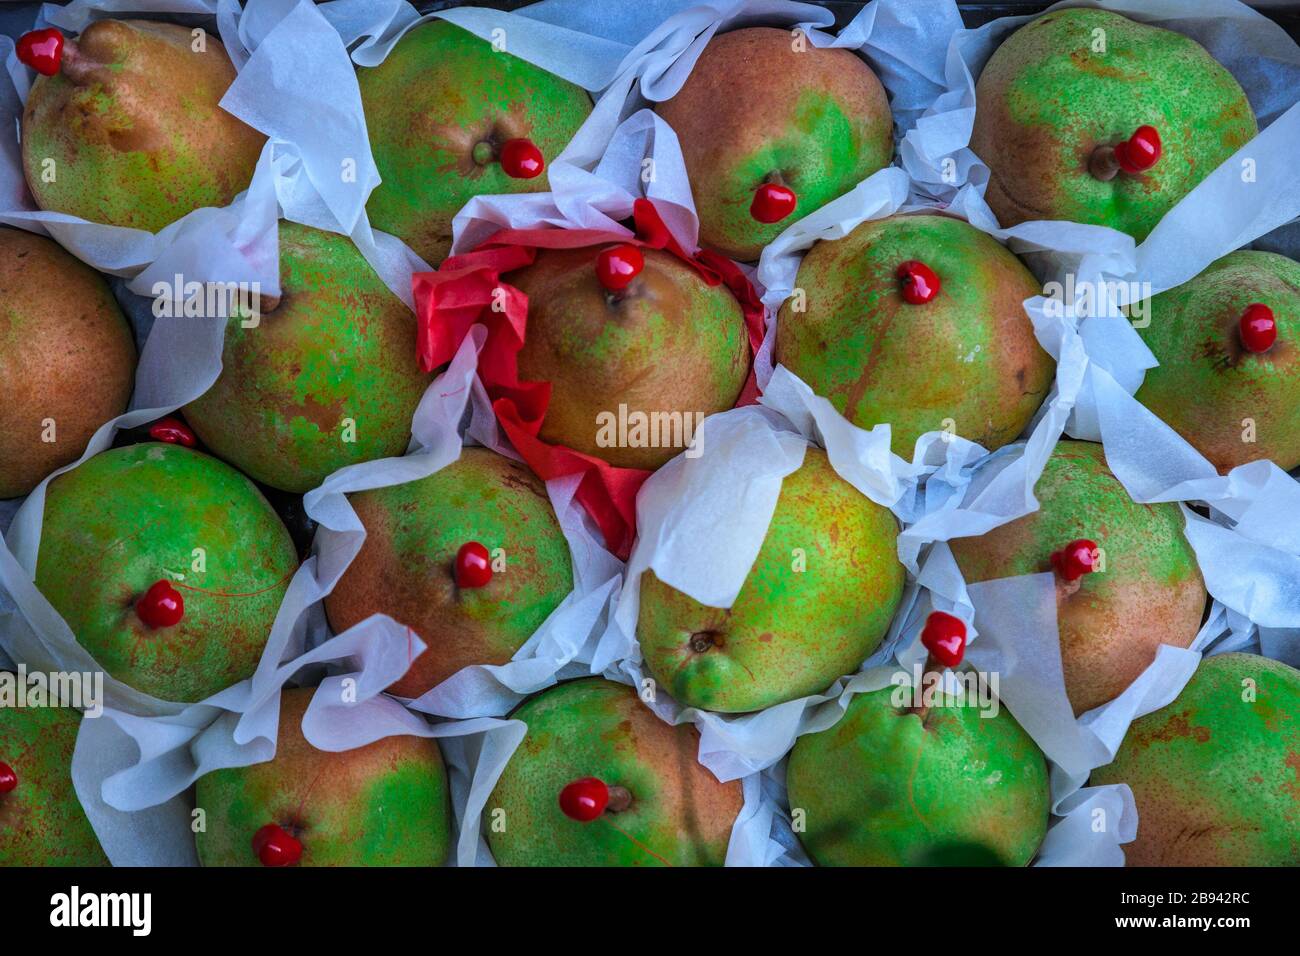 Pears at an outdoor market in Venice, Italy Stock Photo